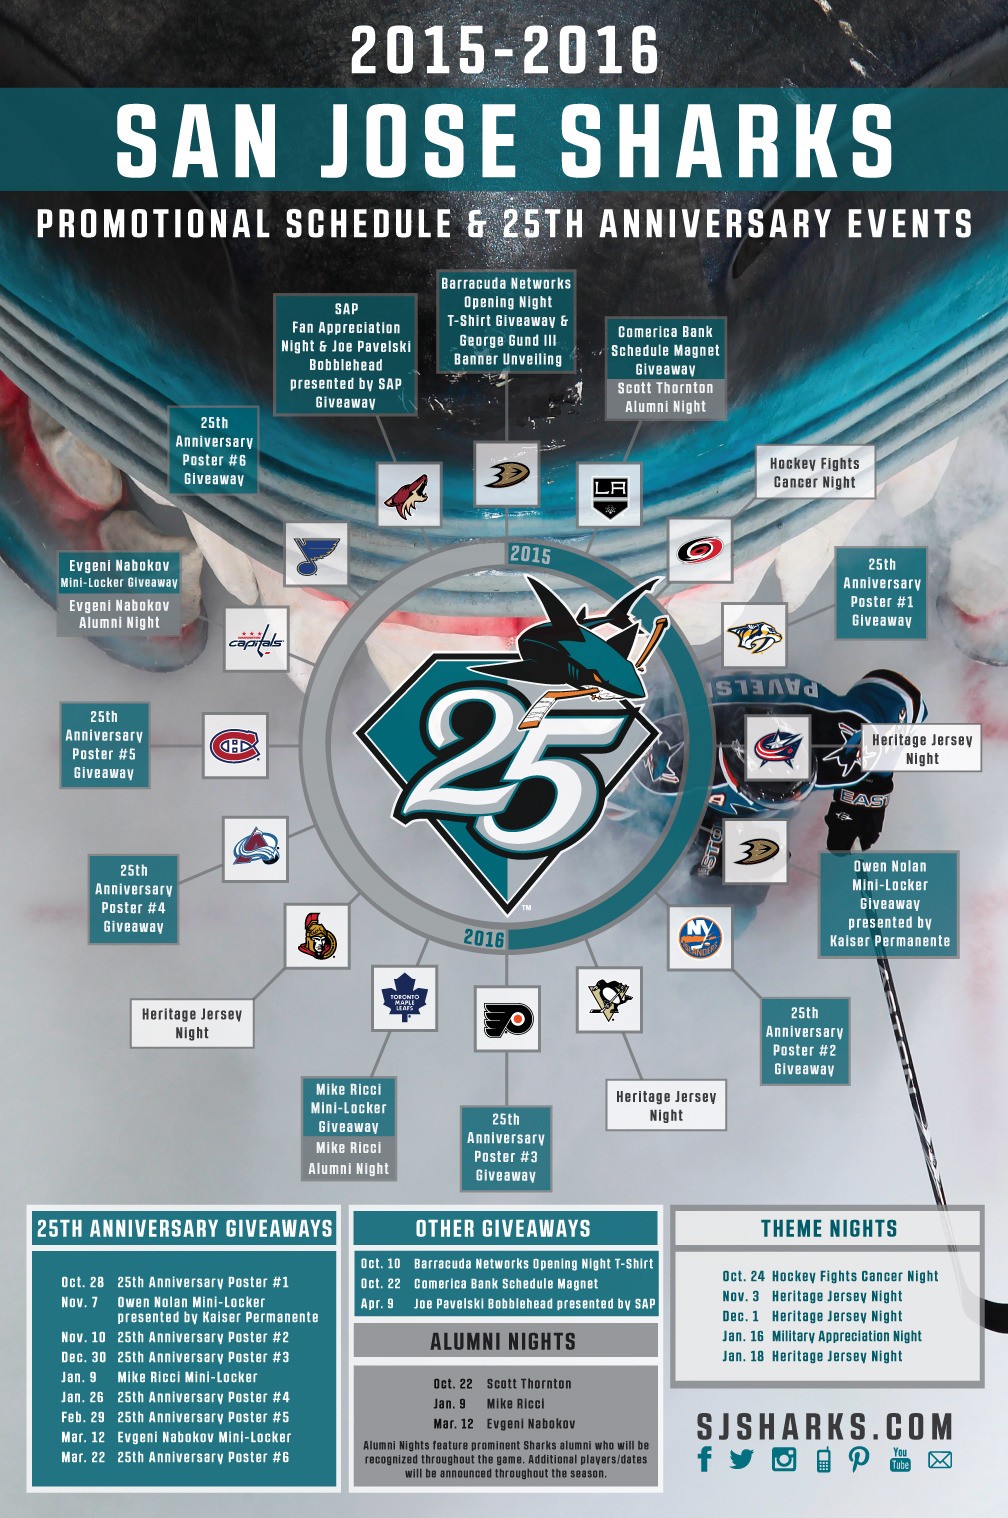 Sharks Announce Promotional Schedule